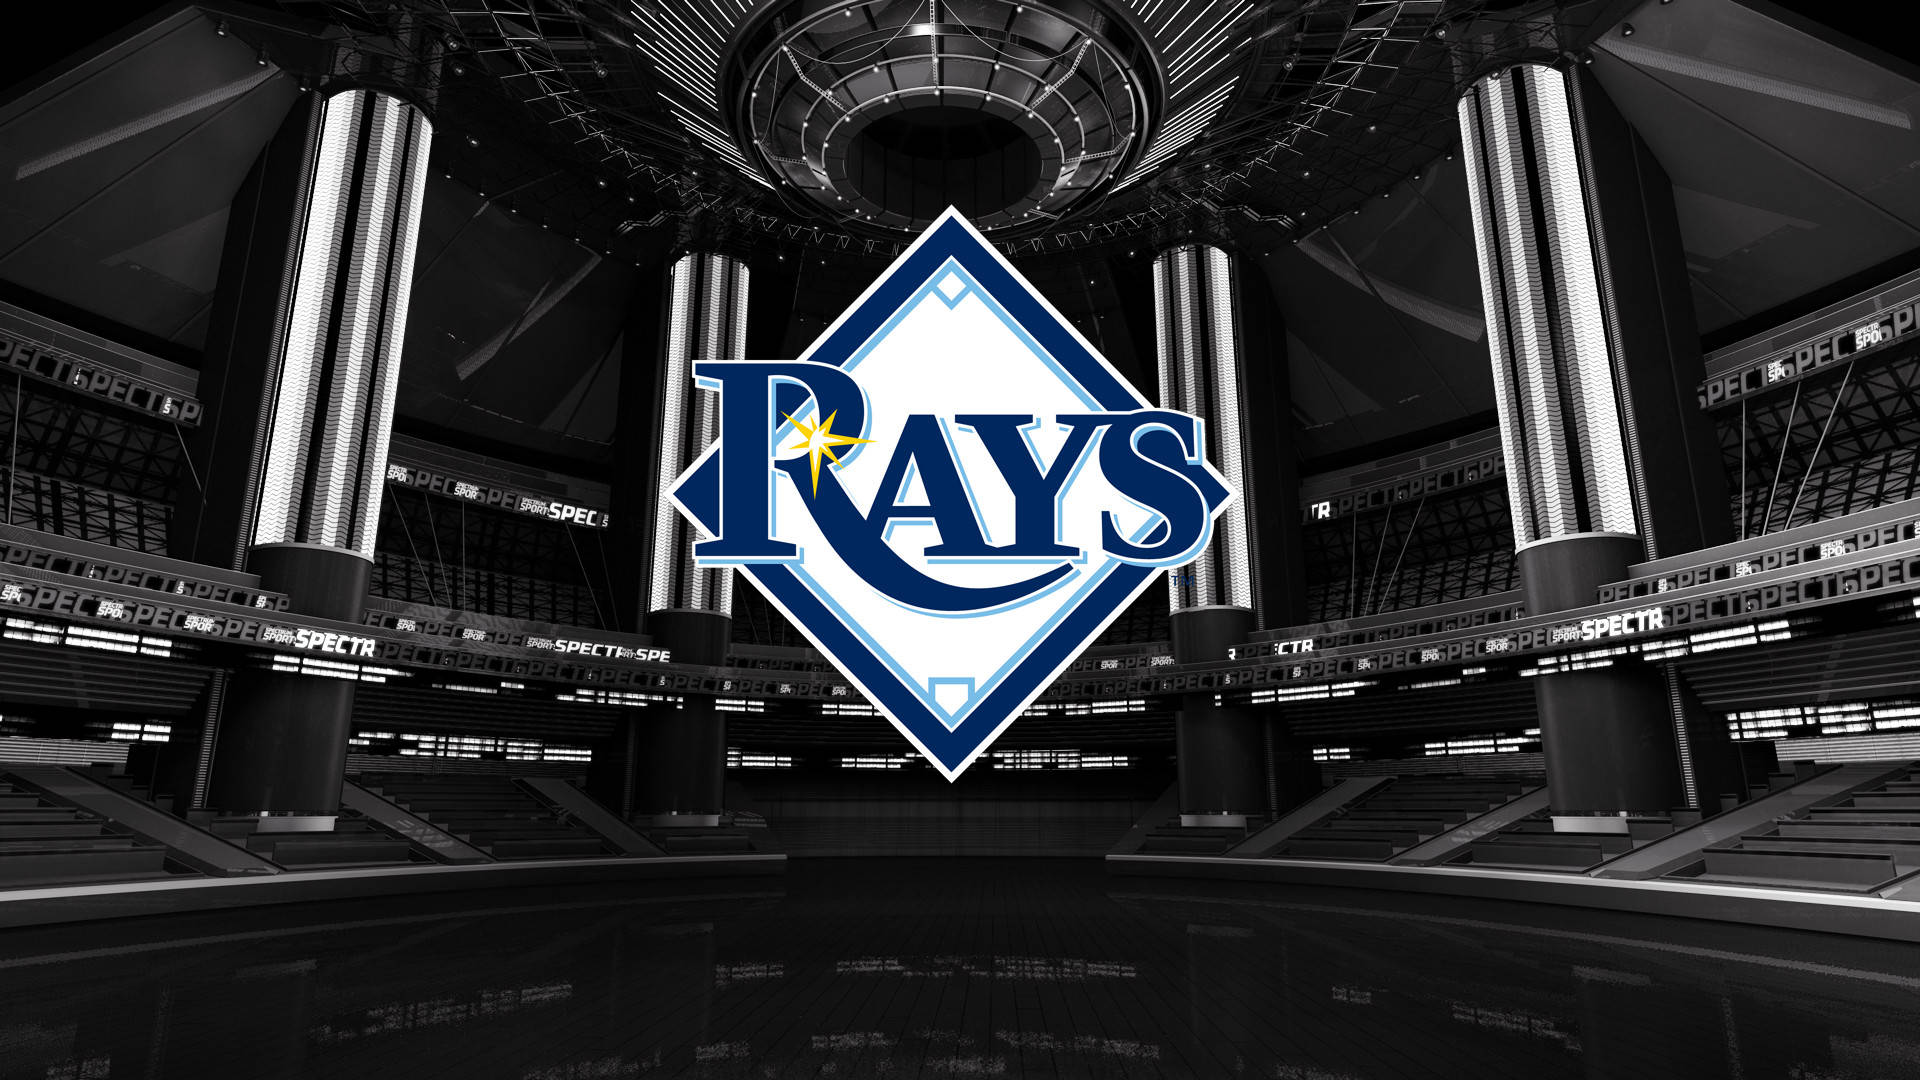 Tampa Bay Rays Iconic Logo Displayed In The Arena